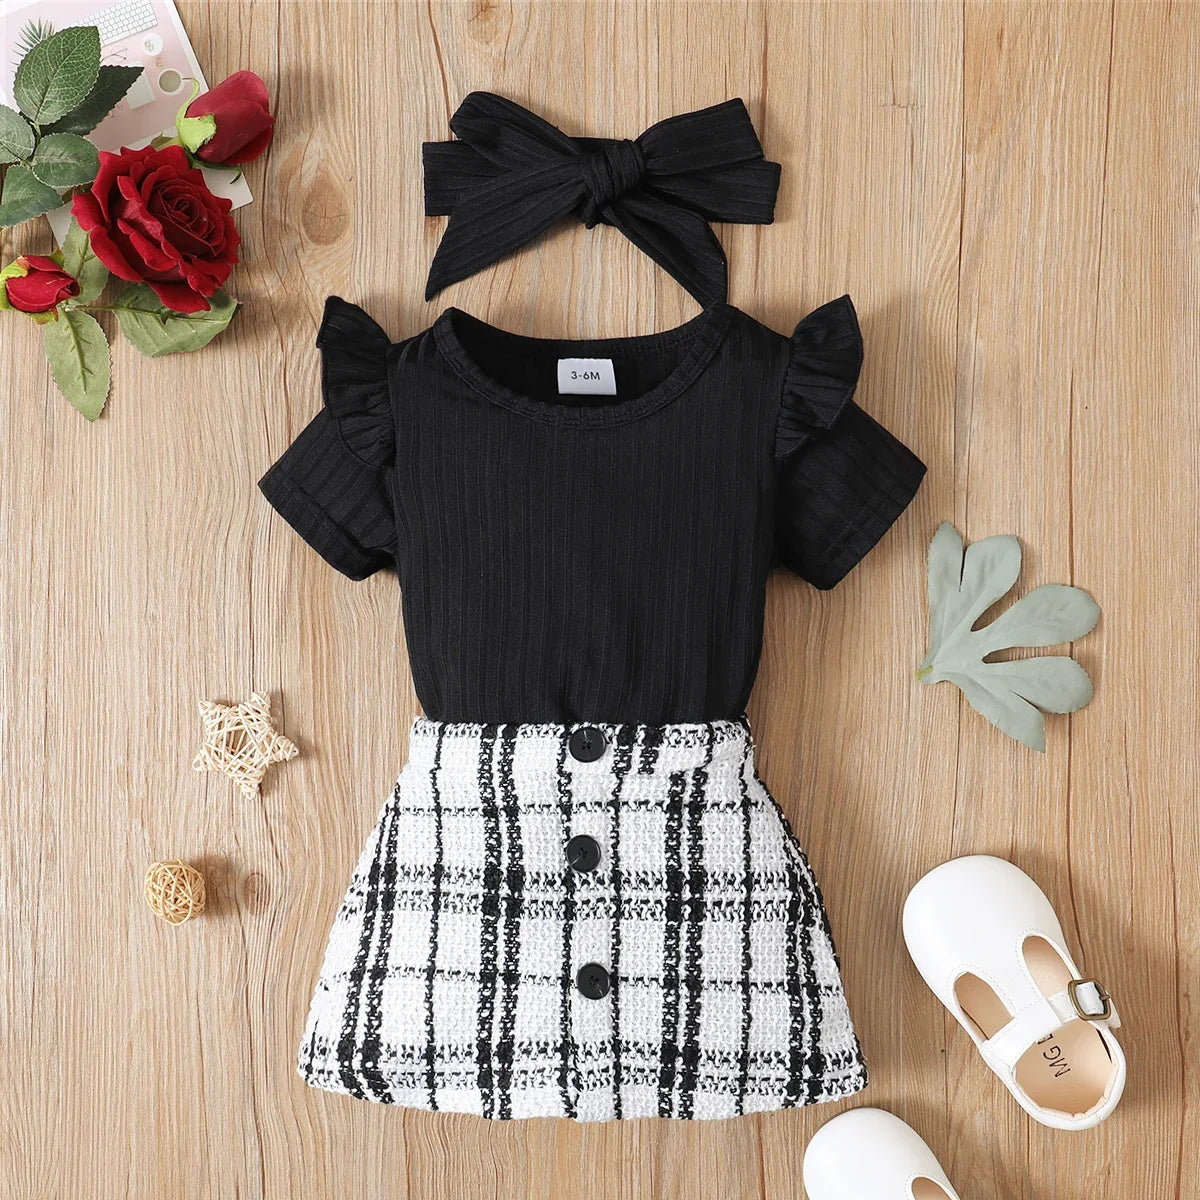 PatPat 3pcs Baby Girl Black Ribbed Short-sleeve Romper and Tweed Skirt with Headband Set Soft and Comfortable Basic Style